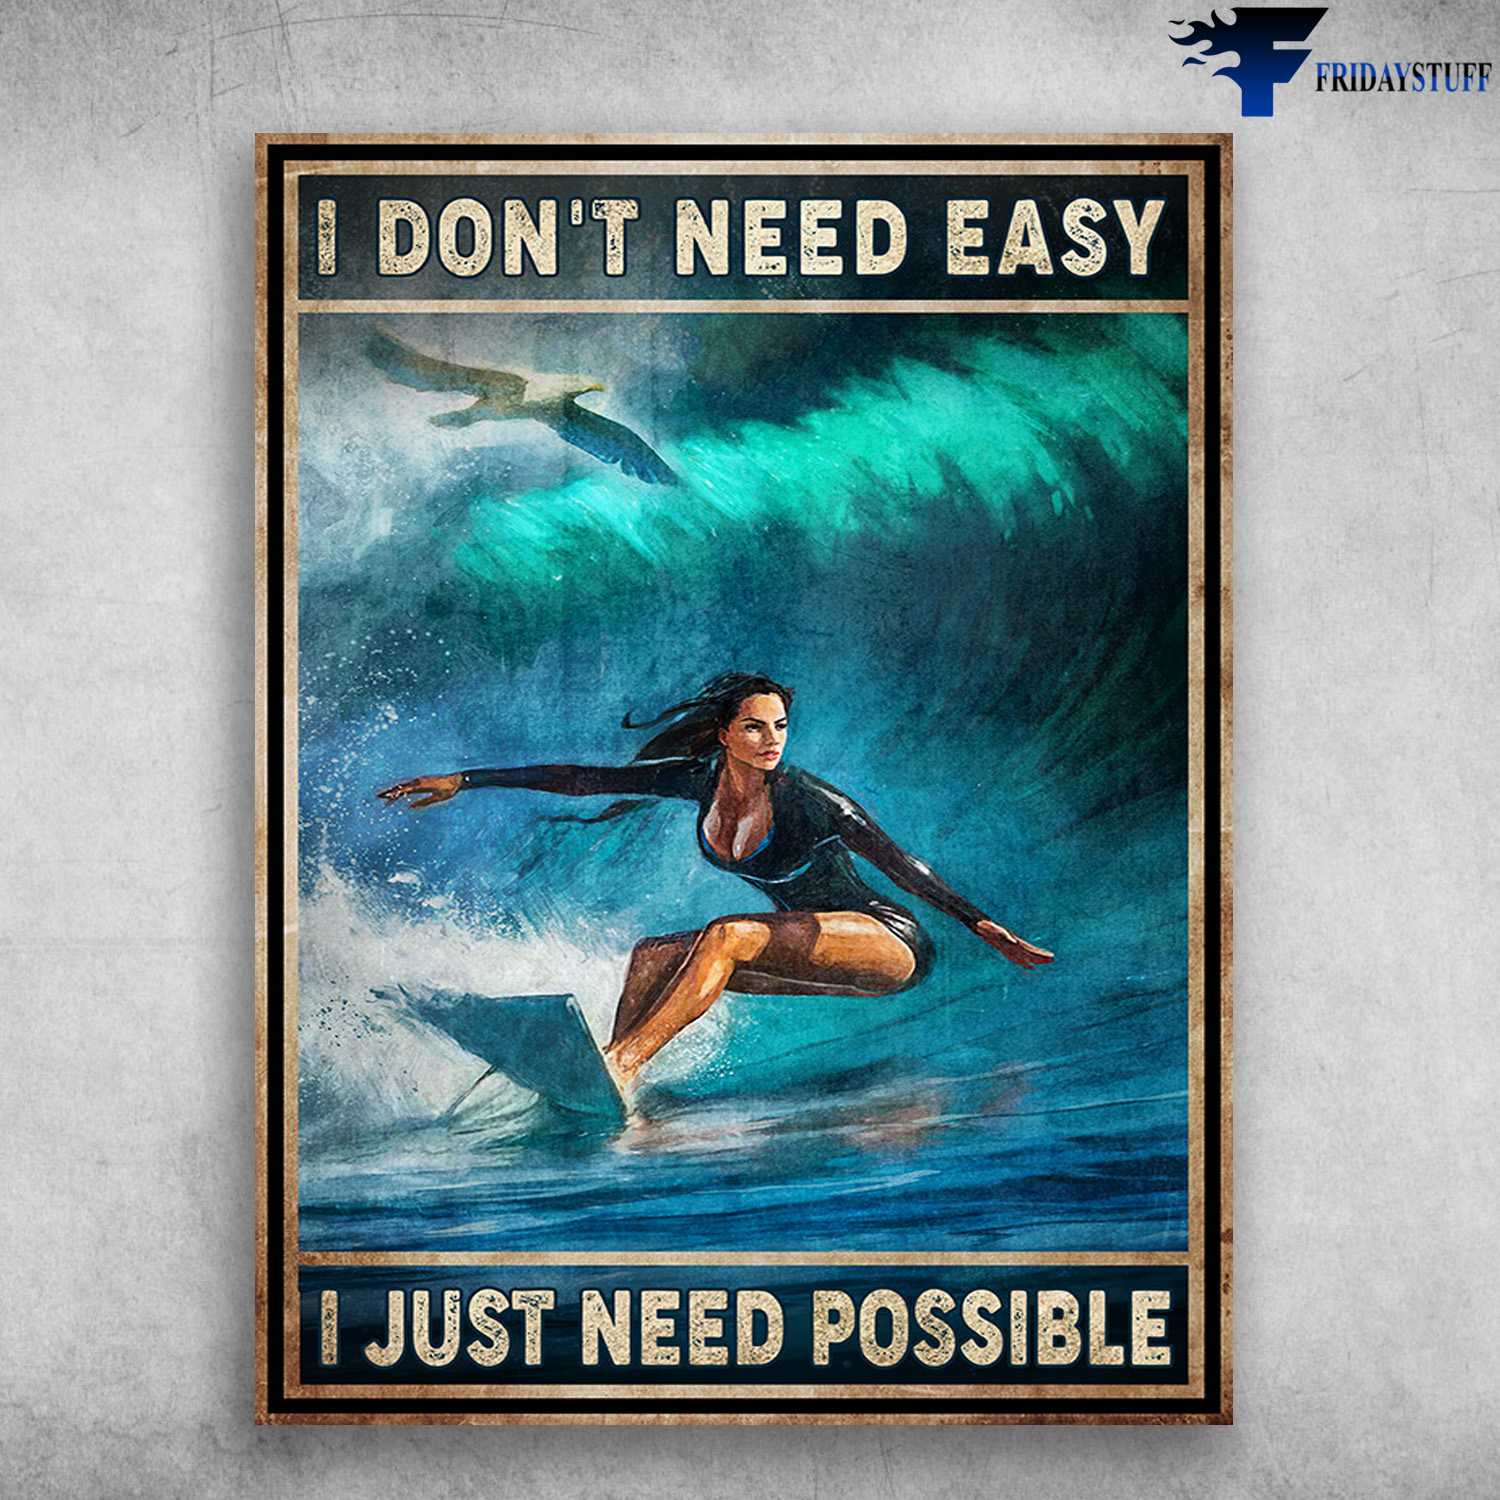 Surfing Poster, Girl Surfing - I Don't Need Easy, I Just Need Possible